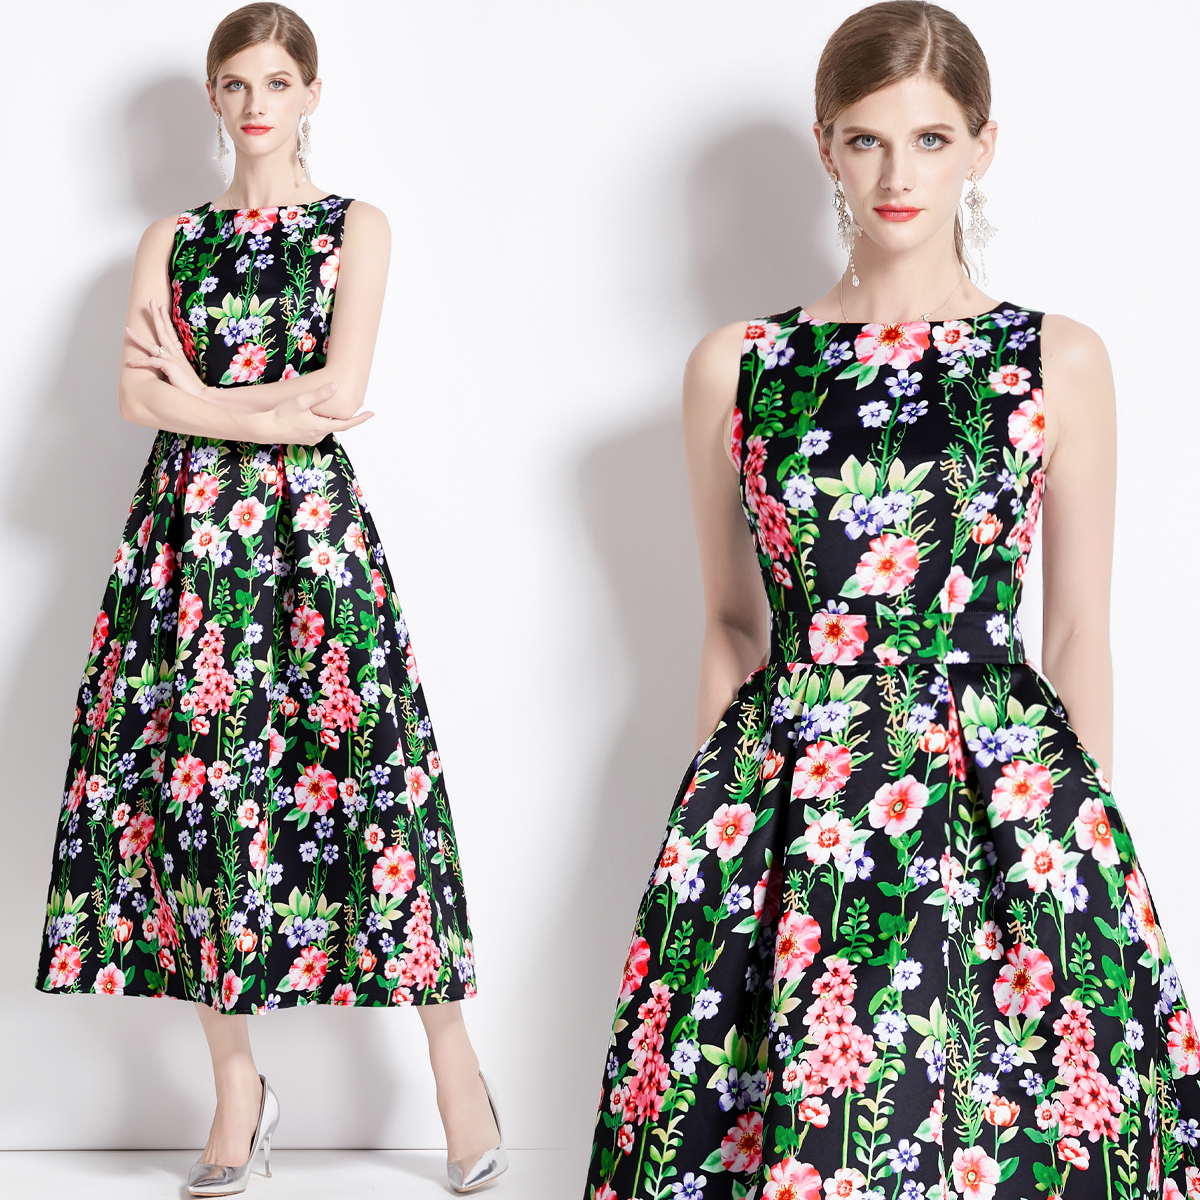 Stereoscopic sleeveless clipping pinched waist dress